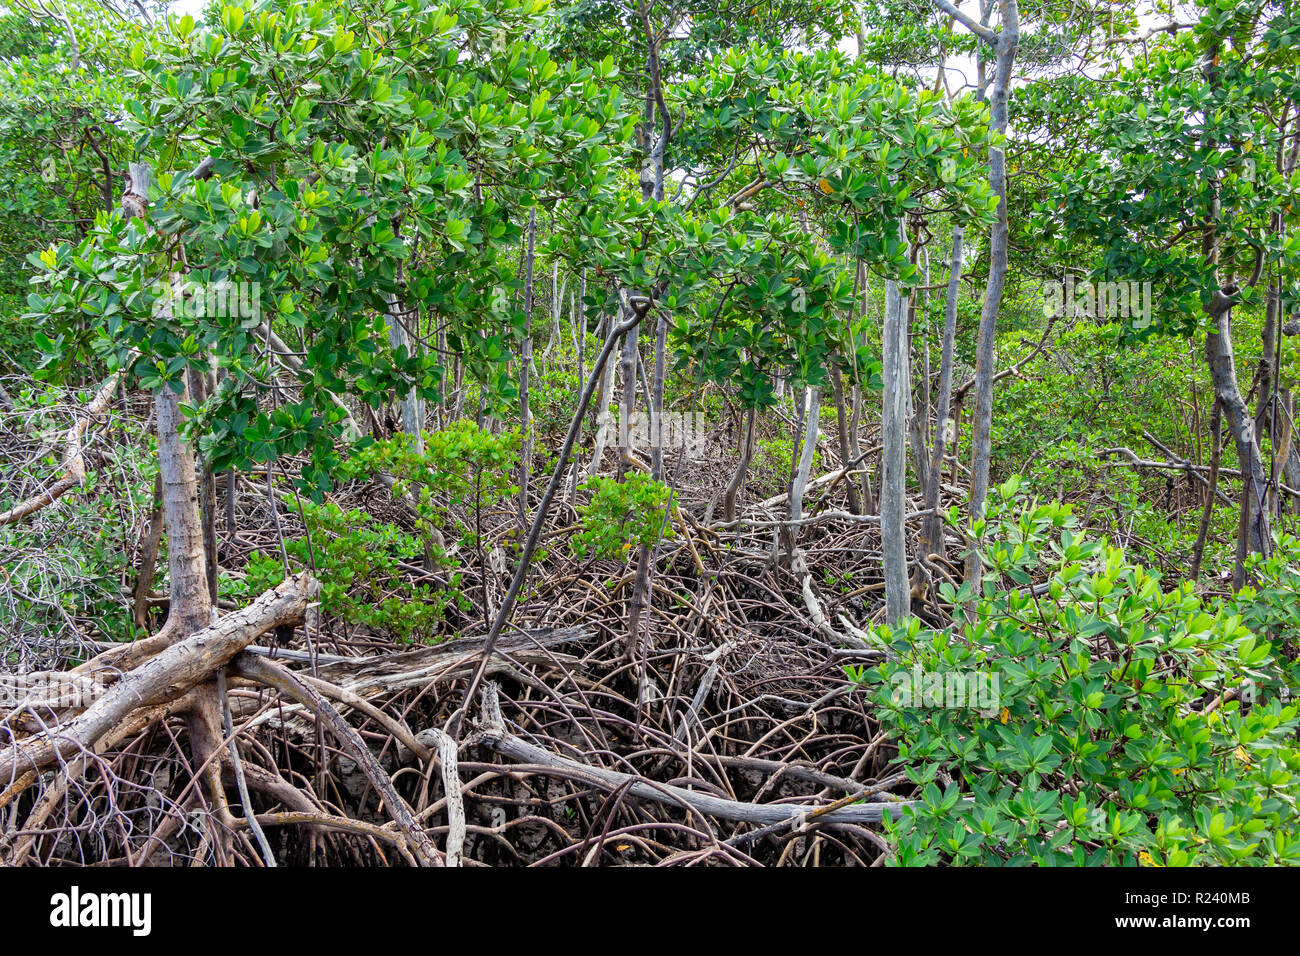 Forest of red mangroves (Rhizophora mangle) with elaborate root systems - Anne Kolb, Hollywood, Florida, USA Stock Photo